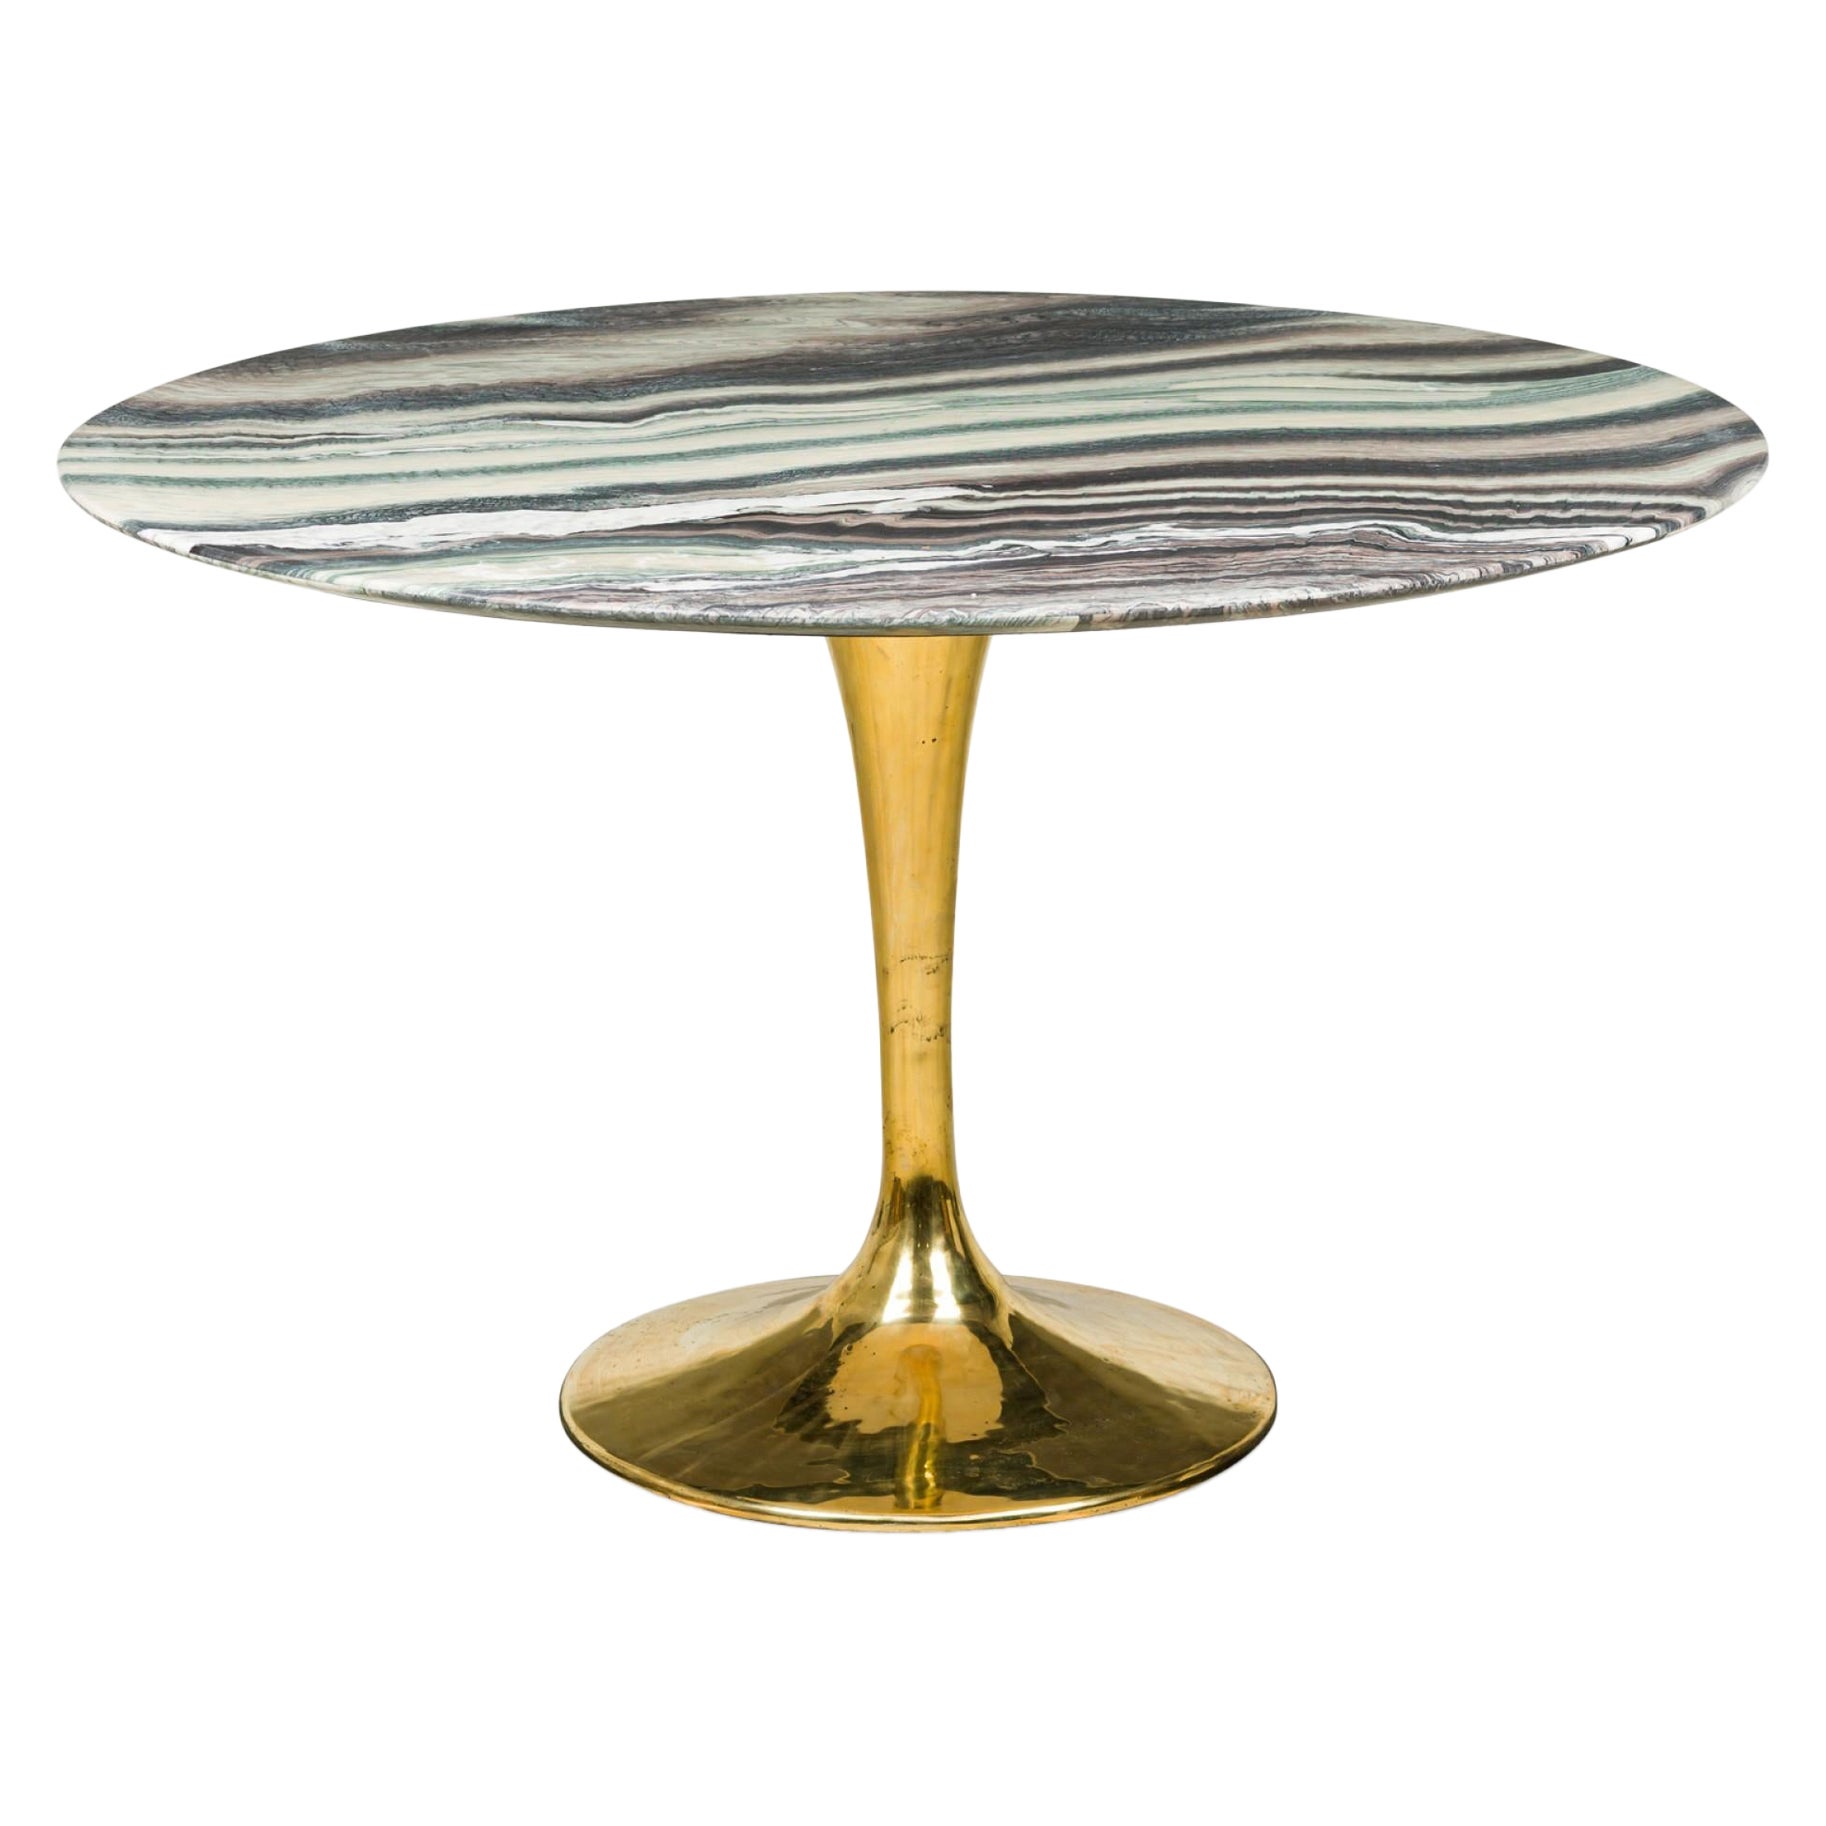 "Tulipa" Circular Polished Bronze and Striated Marble Tulip Form Dining Table For Sale